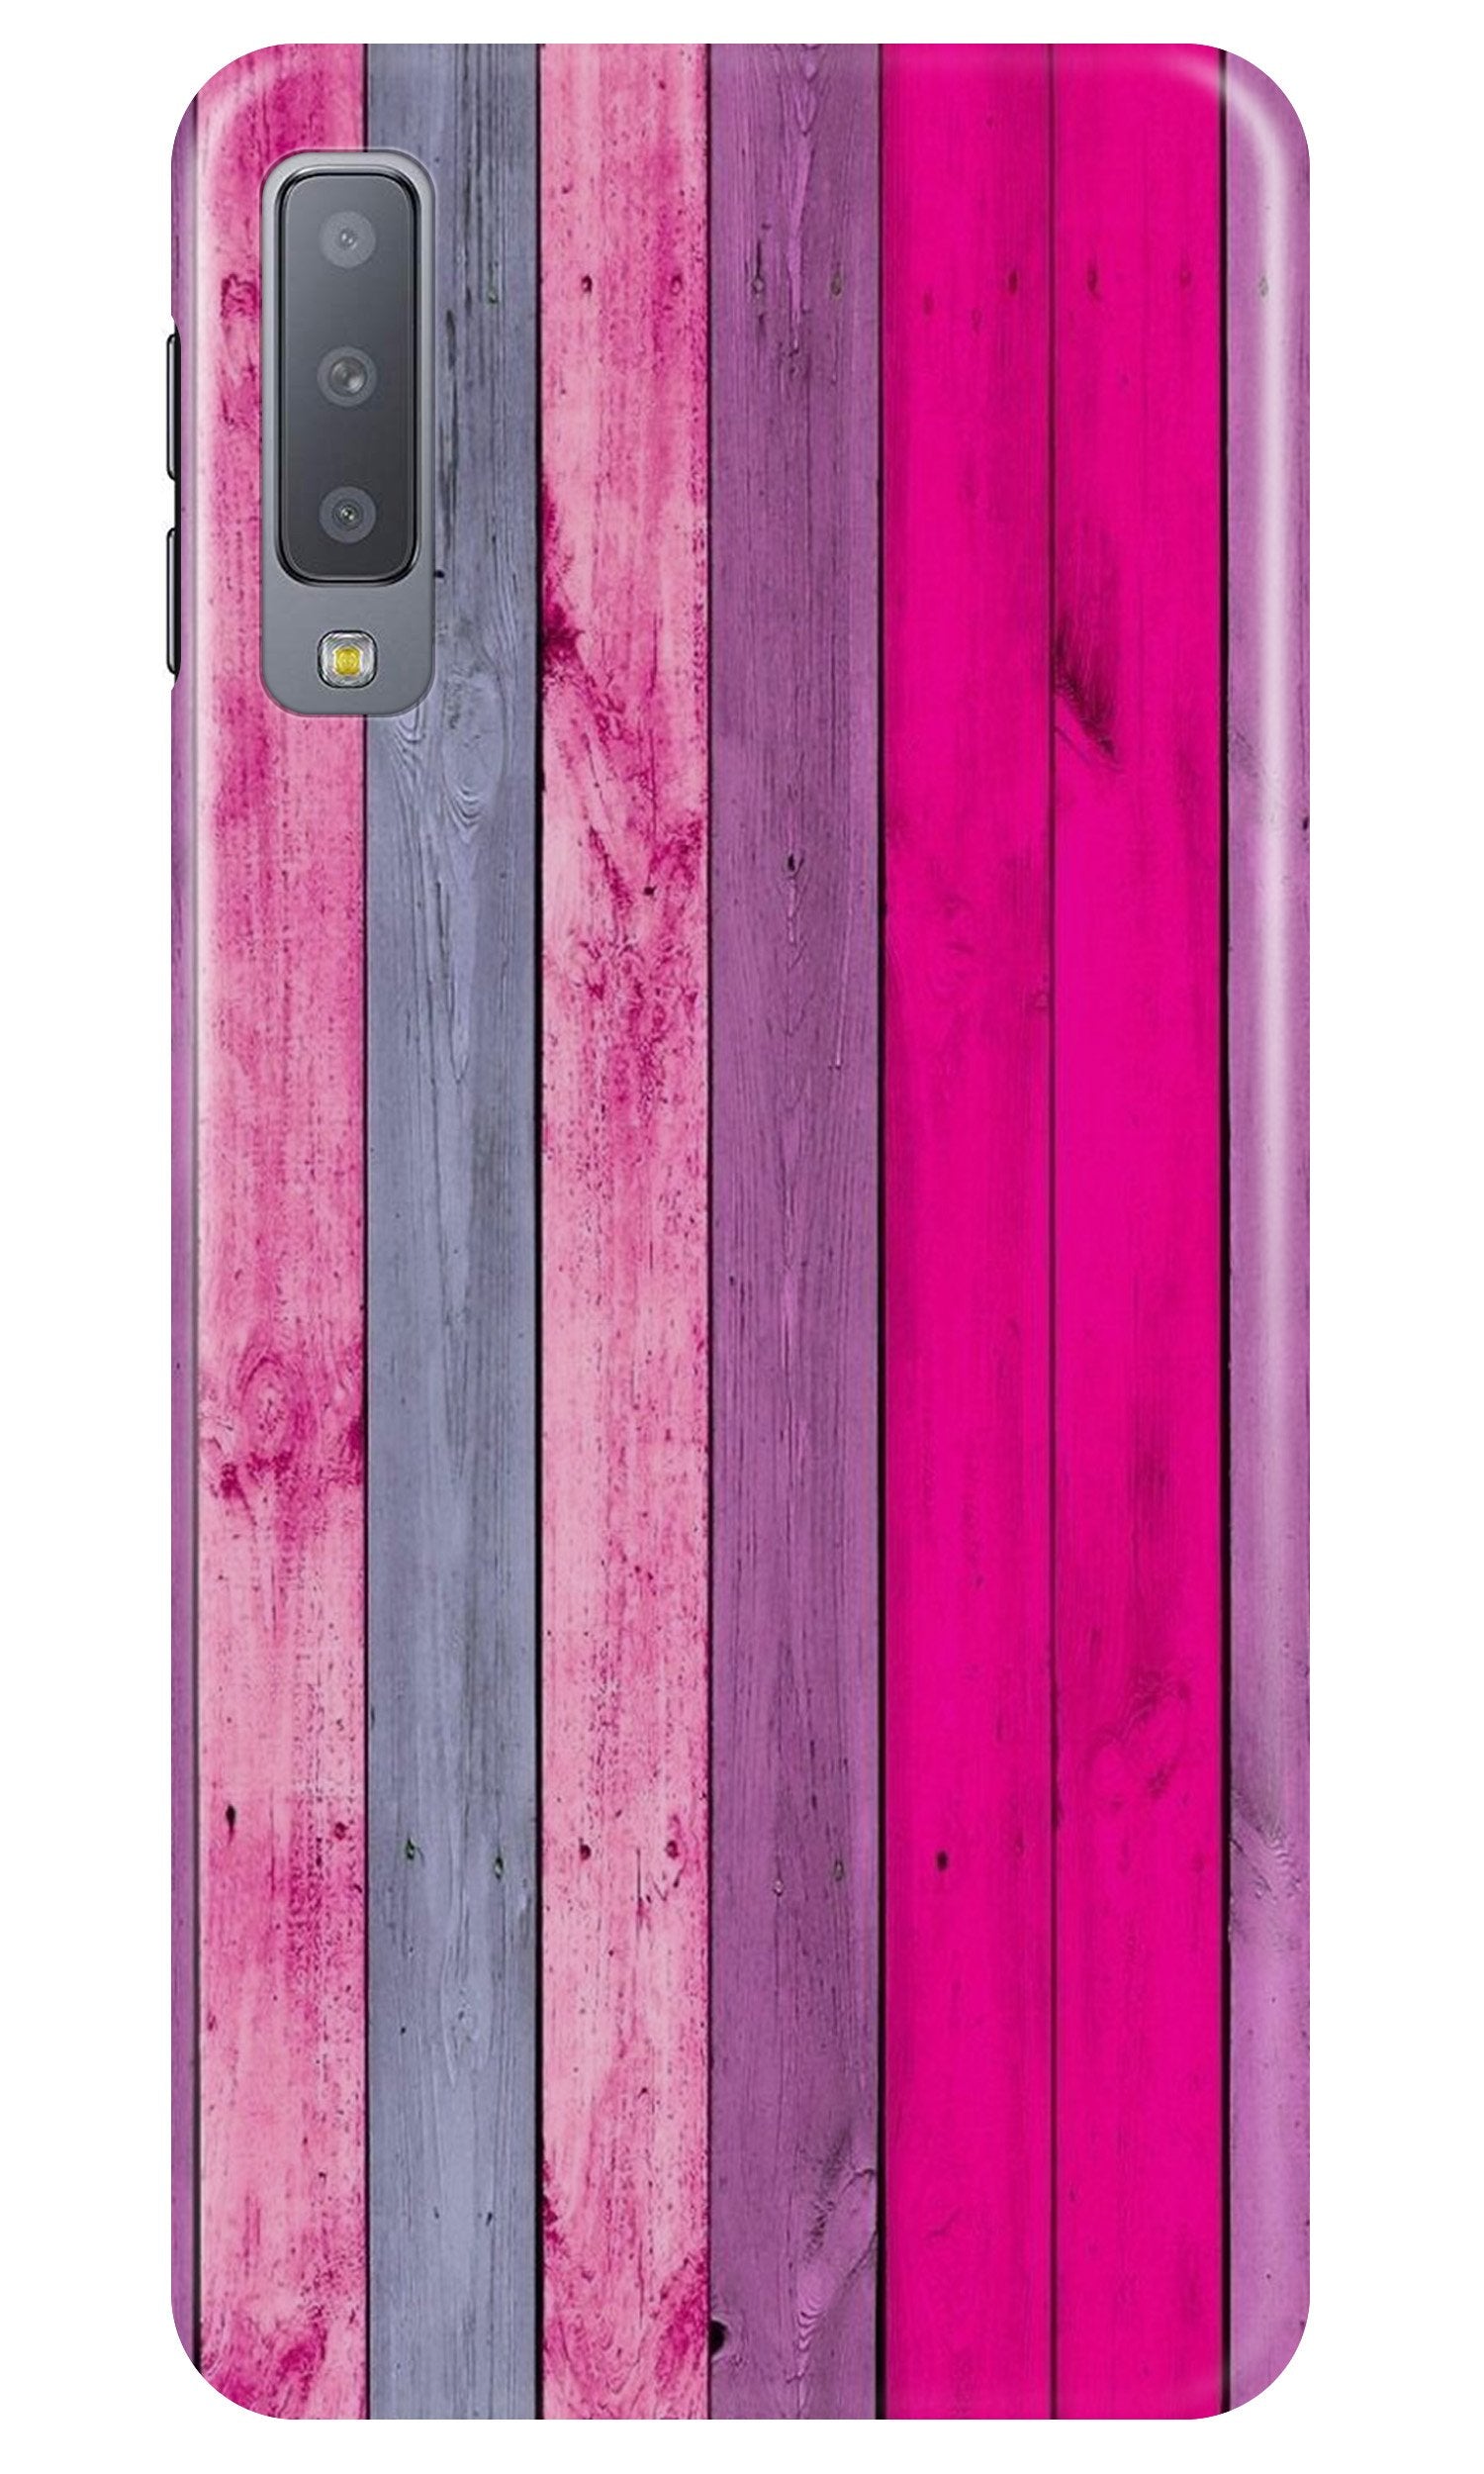 Wooden look Case for Samung Galaxy A70s